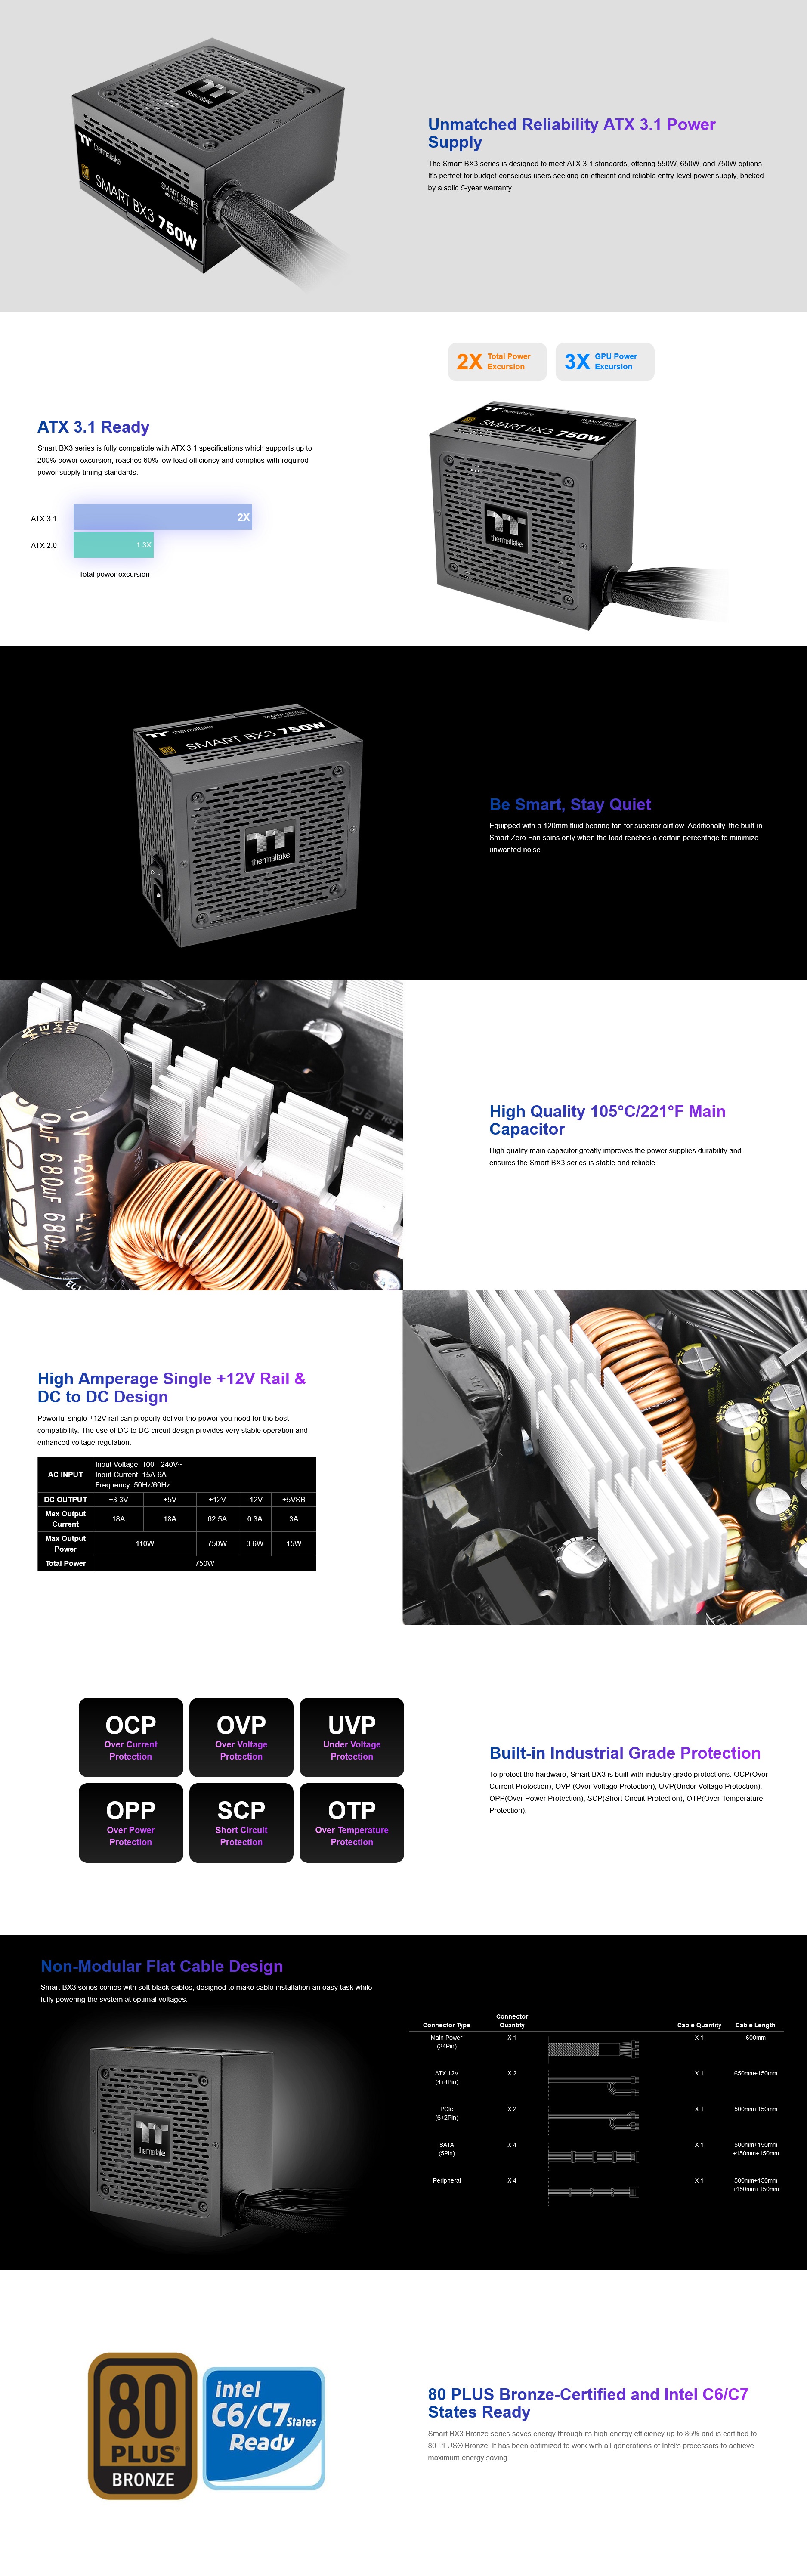 A large marketing image providing additional information about the product Thermaltake Smart BX3 - 750W 80PLUS Bronze PCIe 5.0 ATX PSU - Additional alt info not provided